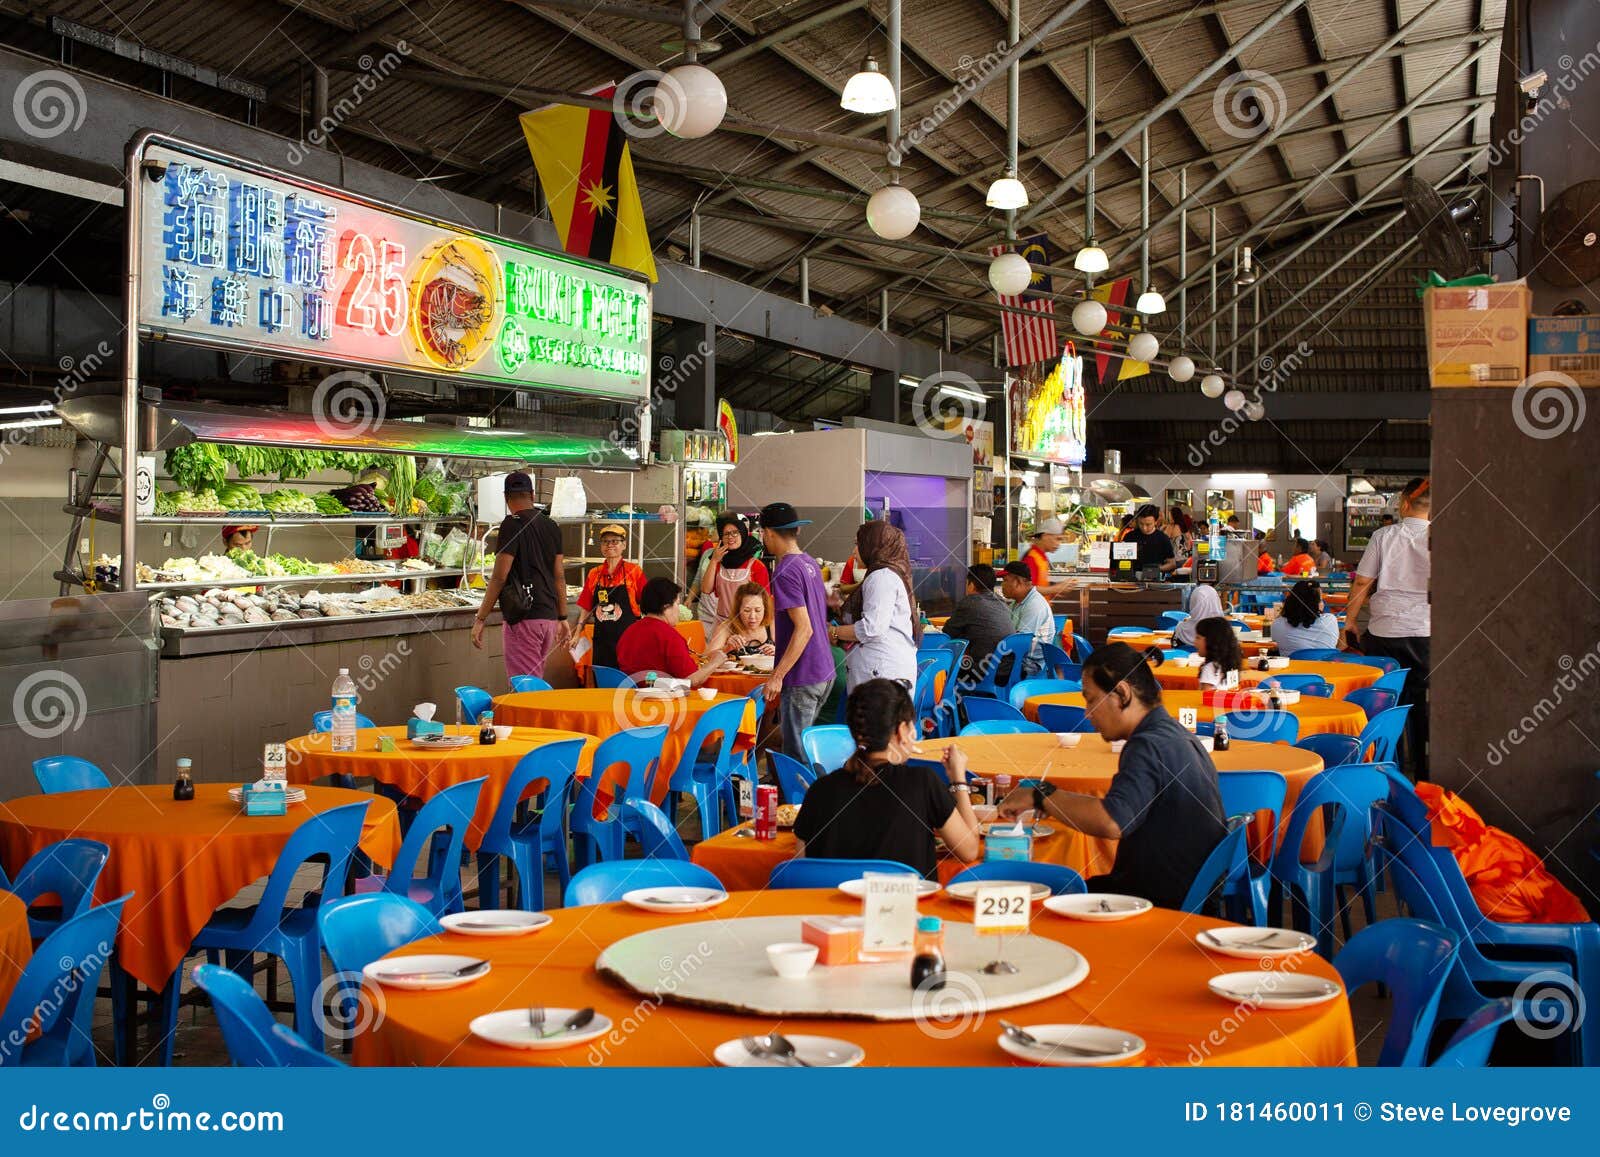 Best Place To Eat In Kuching - 20 Best Places To Eat In Sarawak